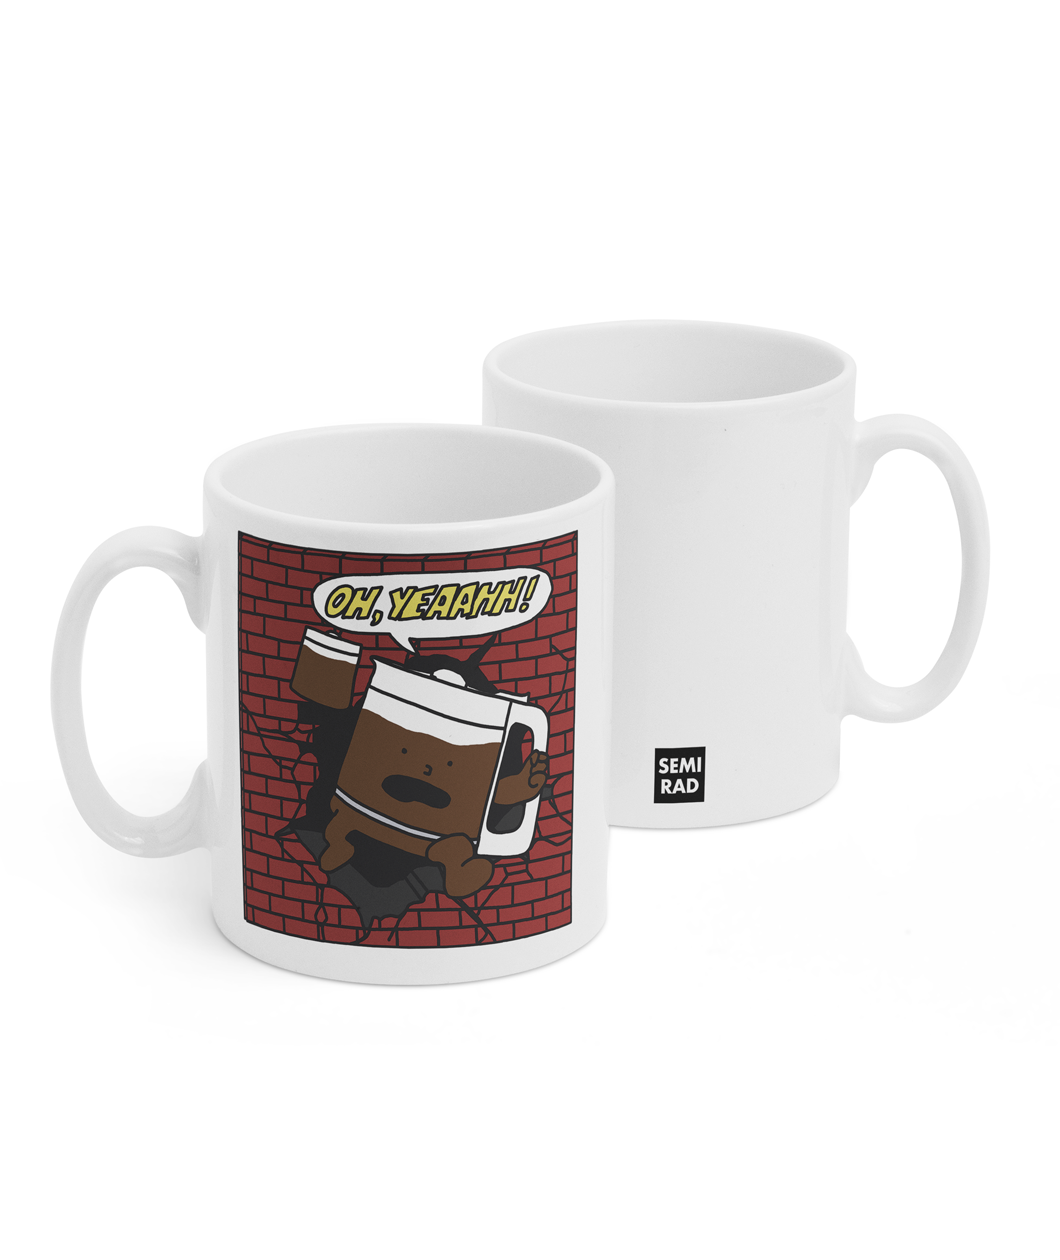 Two white mugs sitting next to each other showing two sides of the same mug. The front side has an illustration of a red, brick wall with a coffee pot with a face, holding a coffee mug breaking through with a speech bubble that says 